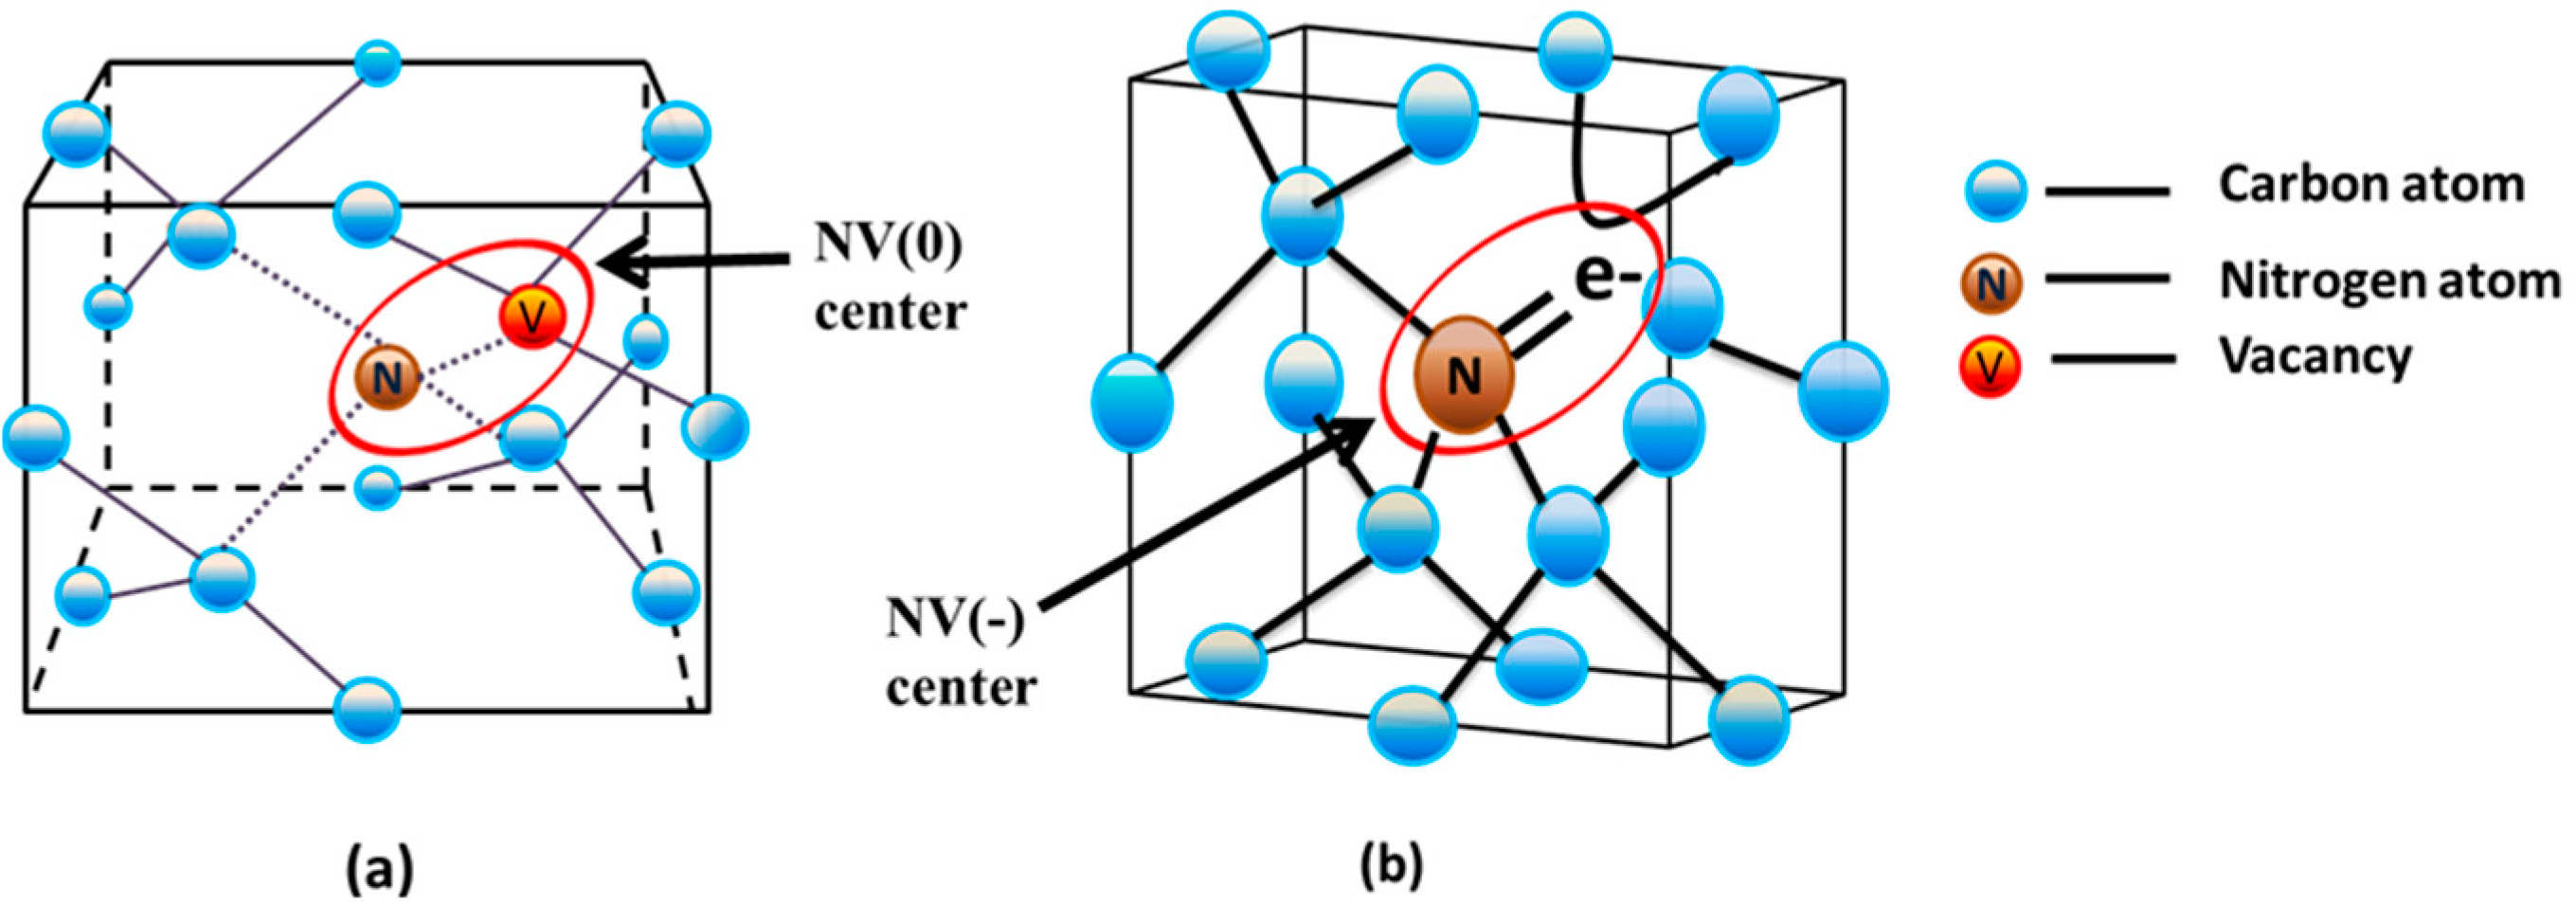 Jmmp Free Full Text An Overview On The Formation And Processing Of Nitrogen Vacancy Photonic Centers In Diamond By Ion Implantation Html